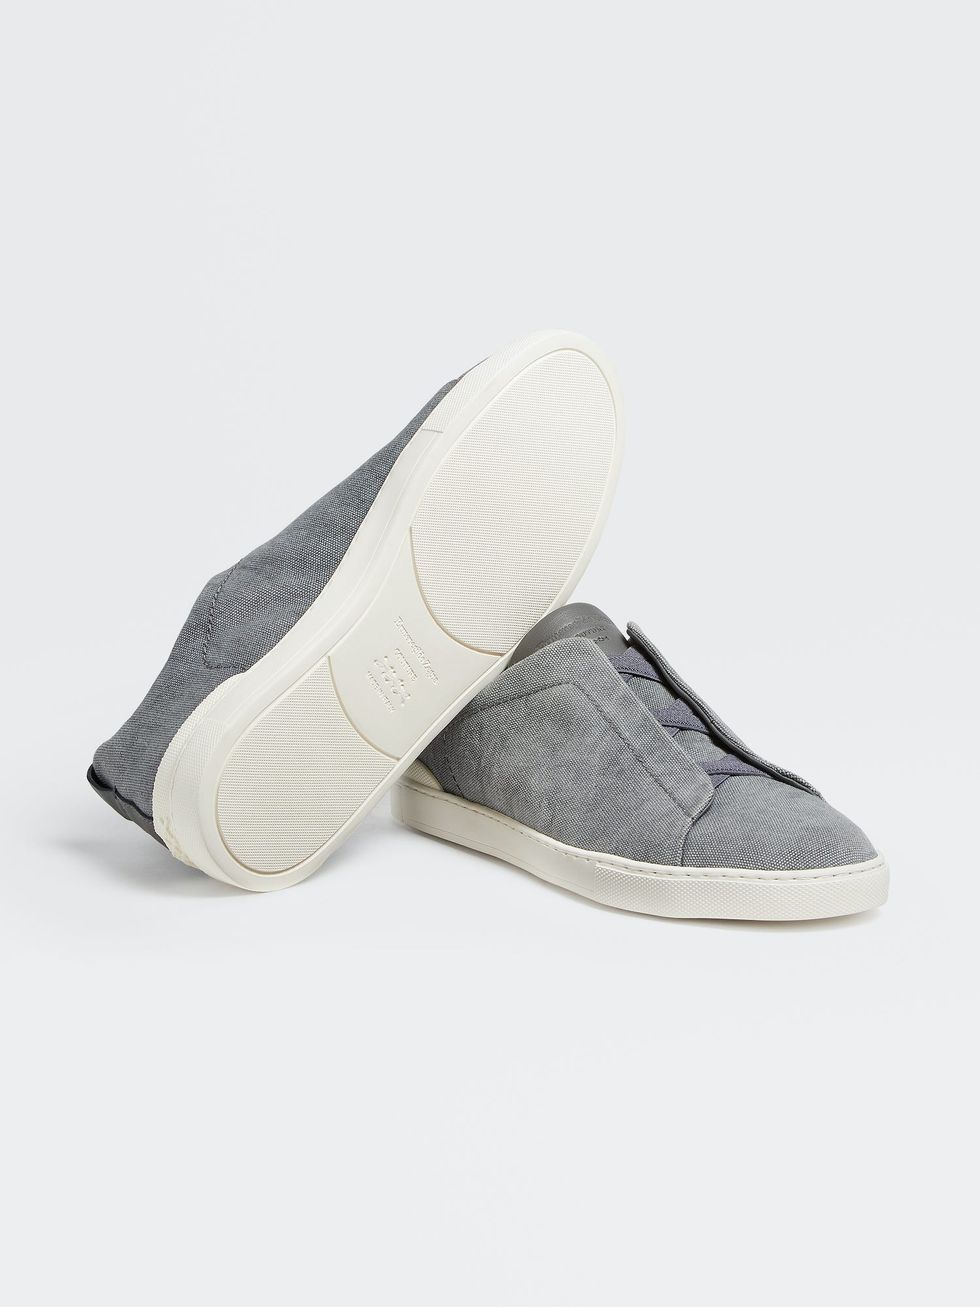 LIGHT GREY SUEDE TRIPLE STITCH™ SNEAKERS